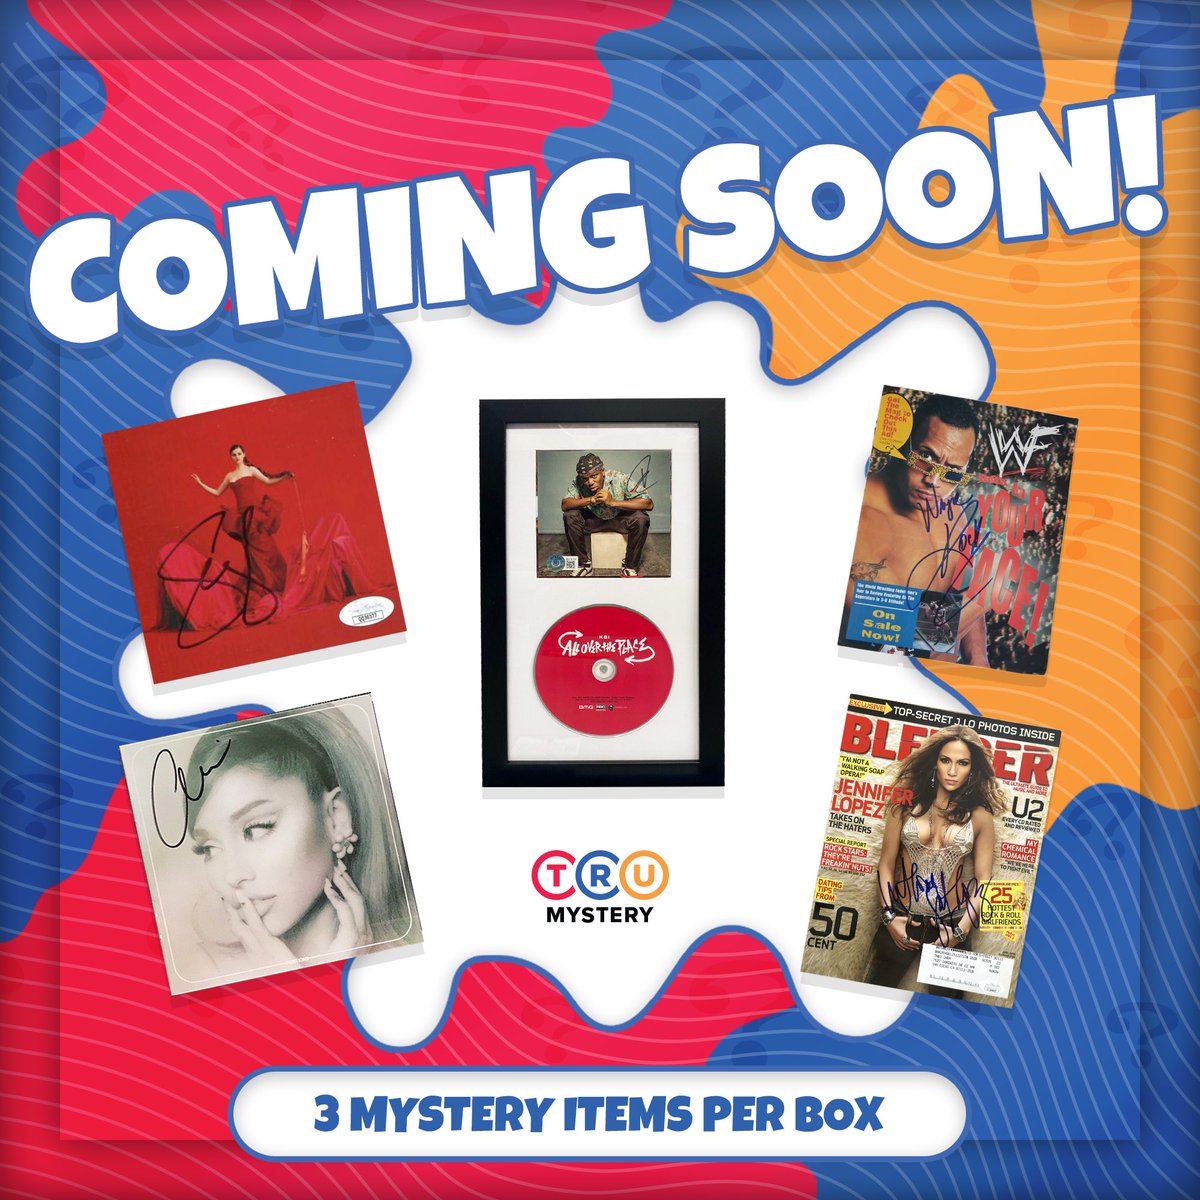 Autographed items from your favorite celebrities and athletes - Which one are you picking? 👀 3 mystery items per box - TruMystery is almost here! 🔥 #TruCreator